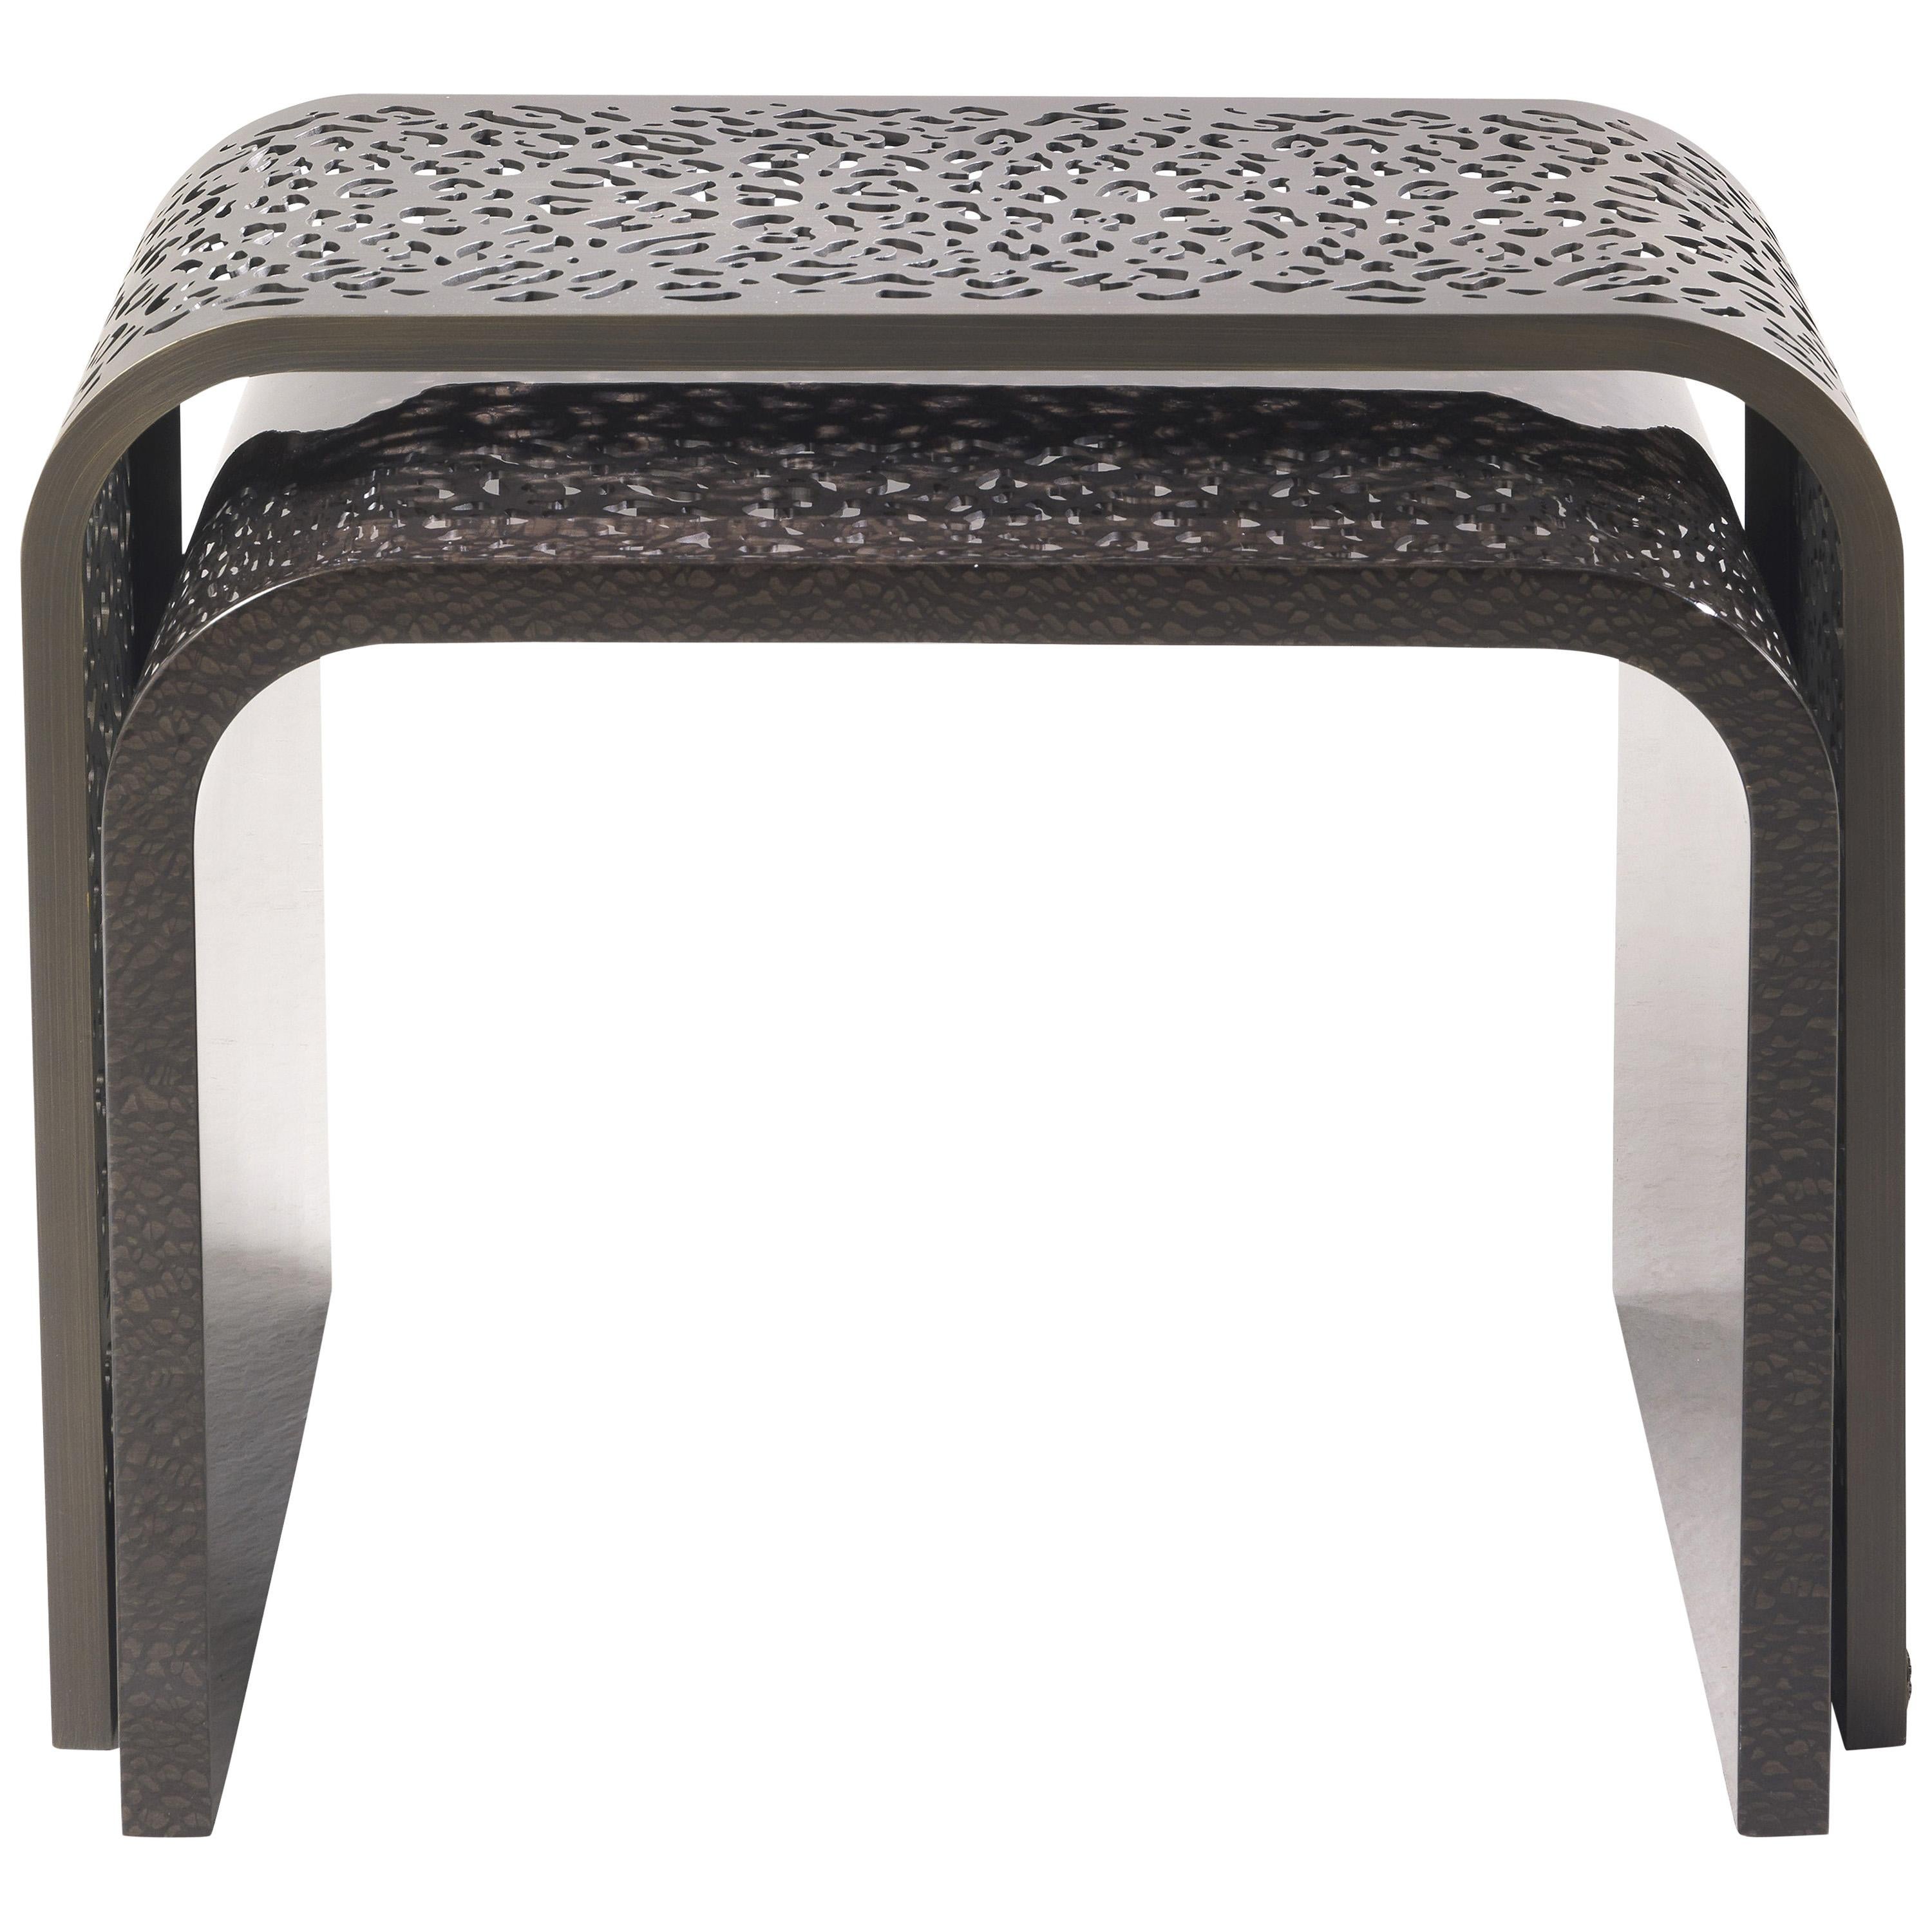 21st Century Watamu Side Table in Carbalho by Roberto Cavalli Home Interiors  For Sale